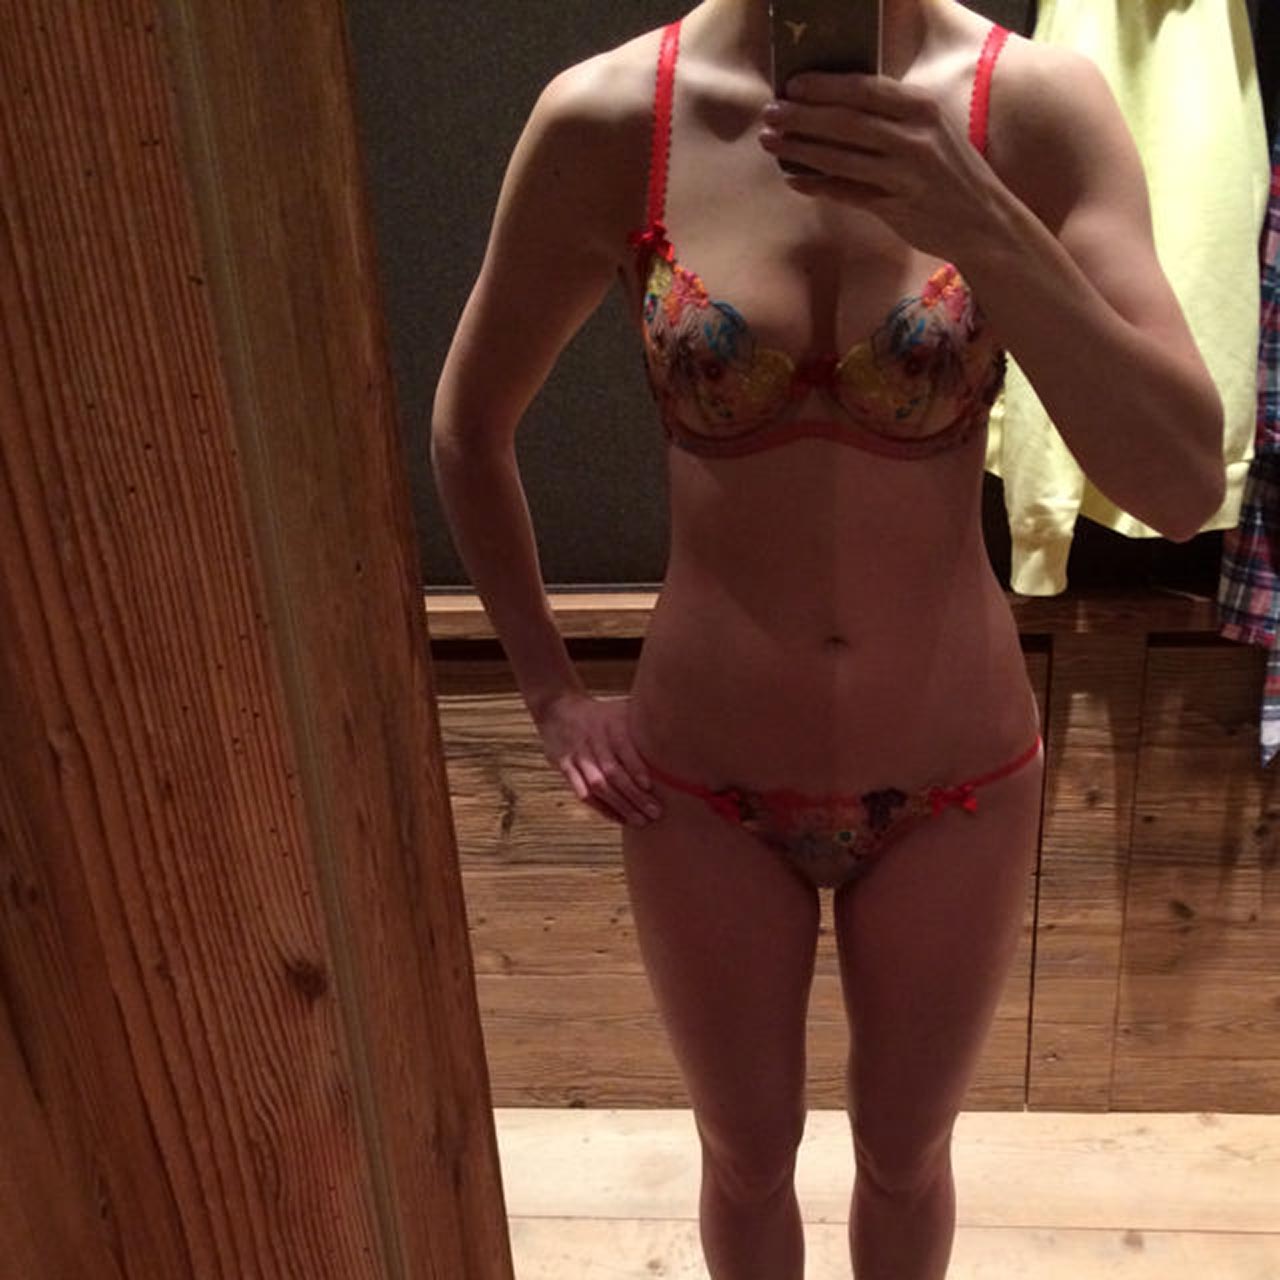 Formula 1 Driver Susie Wolff Private Nude Pics LEAKED Online